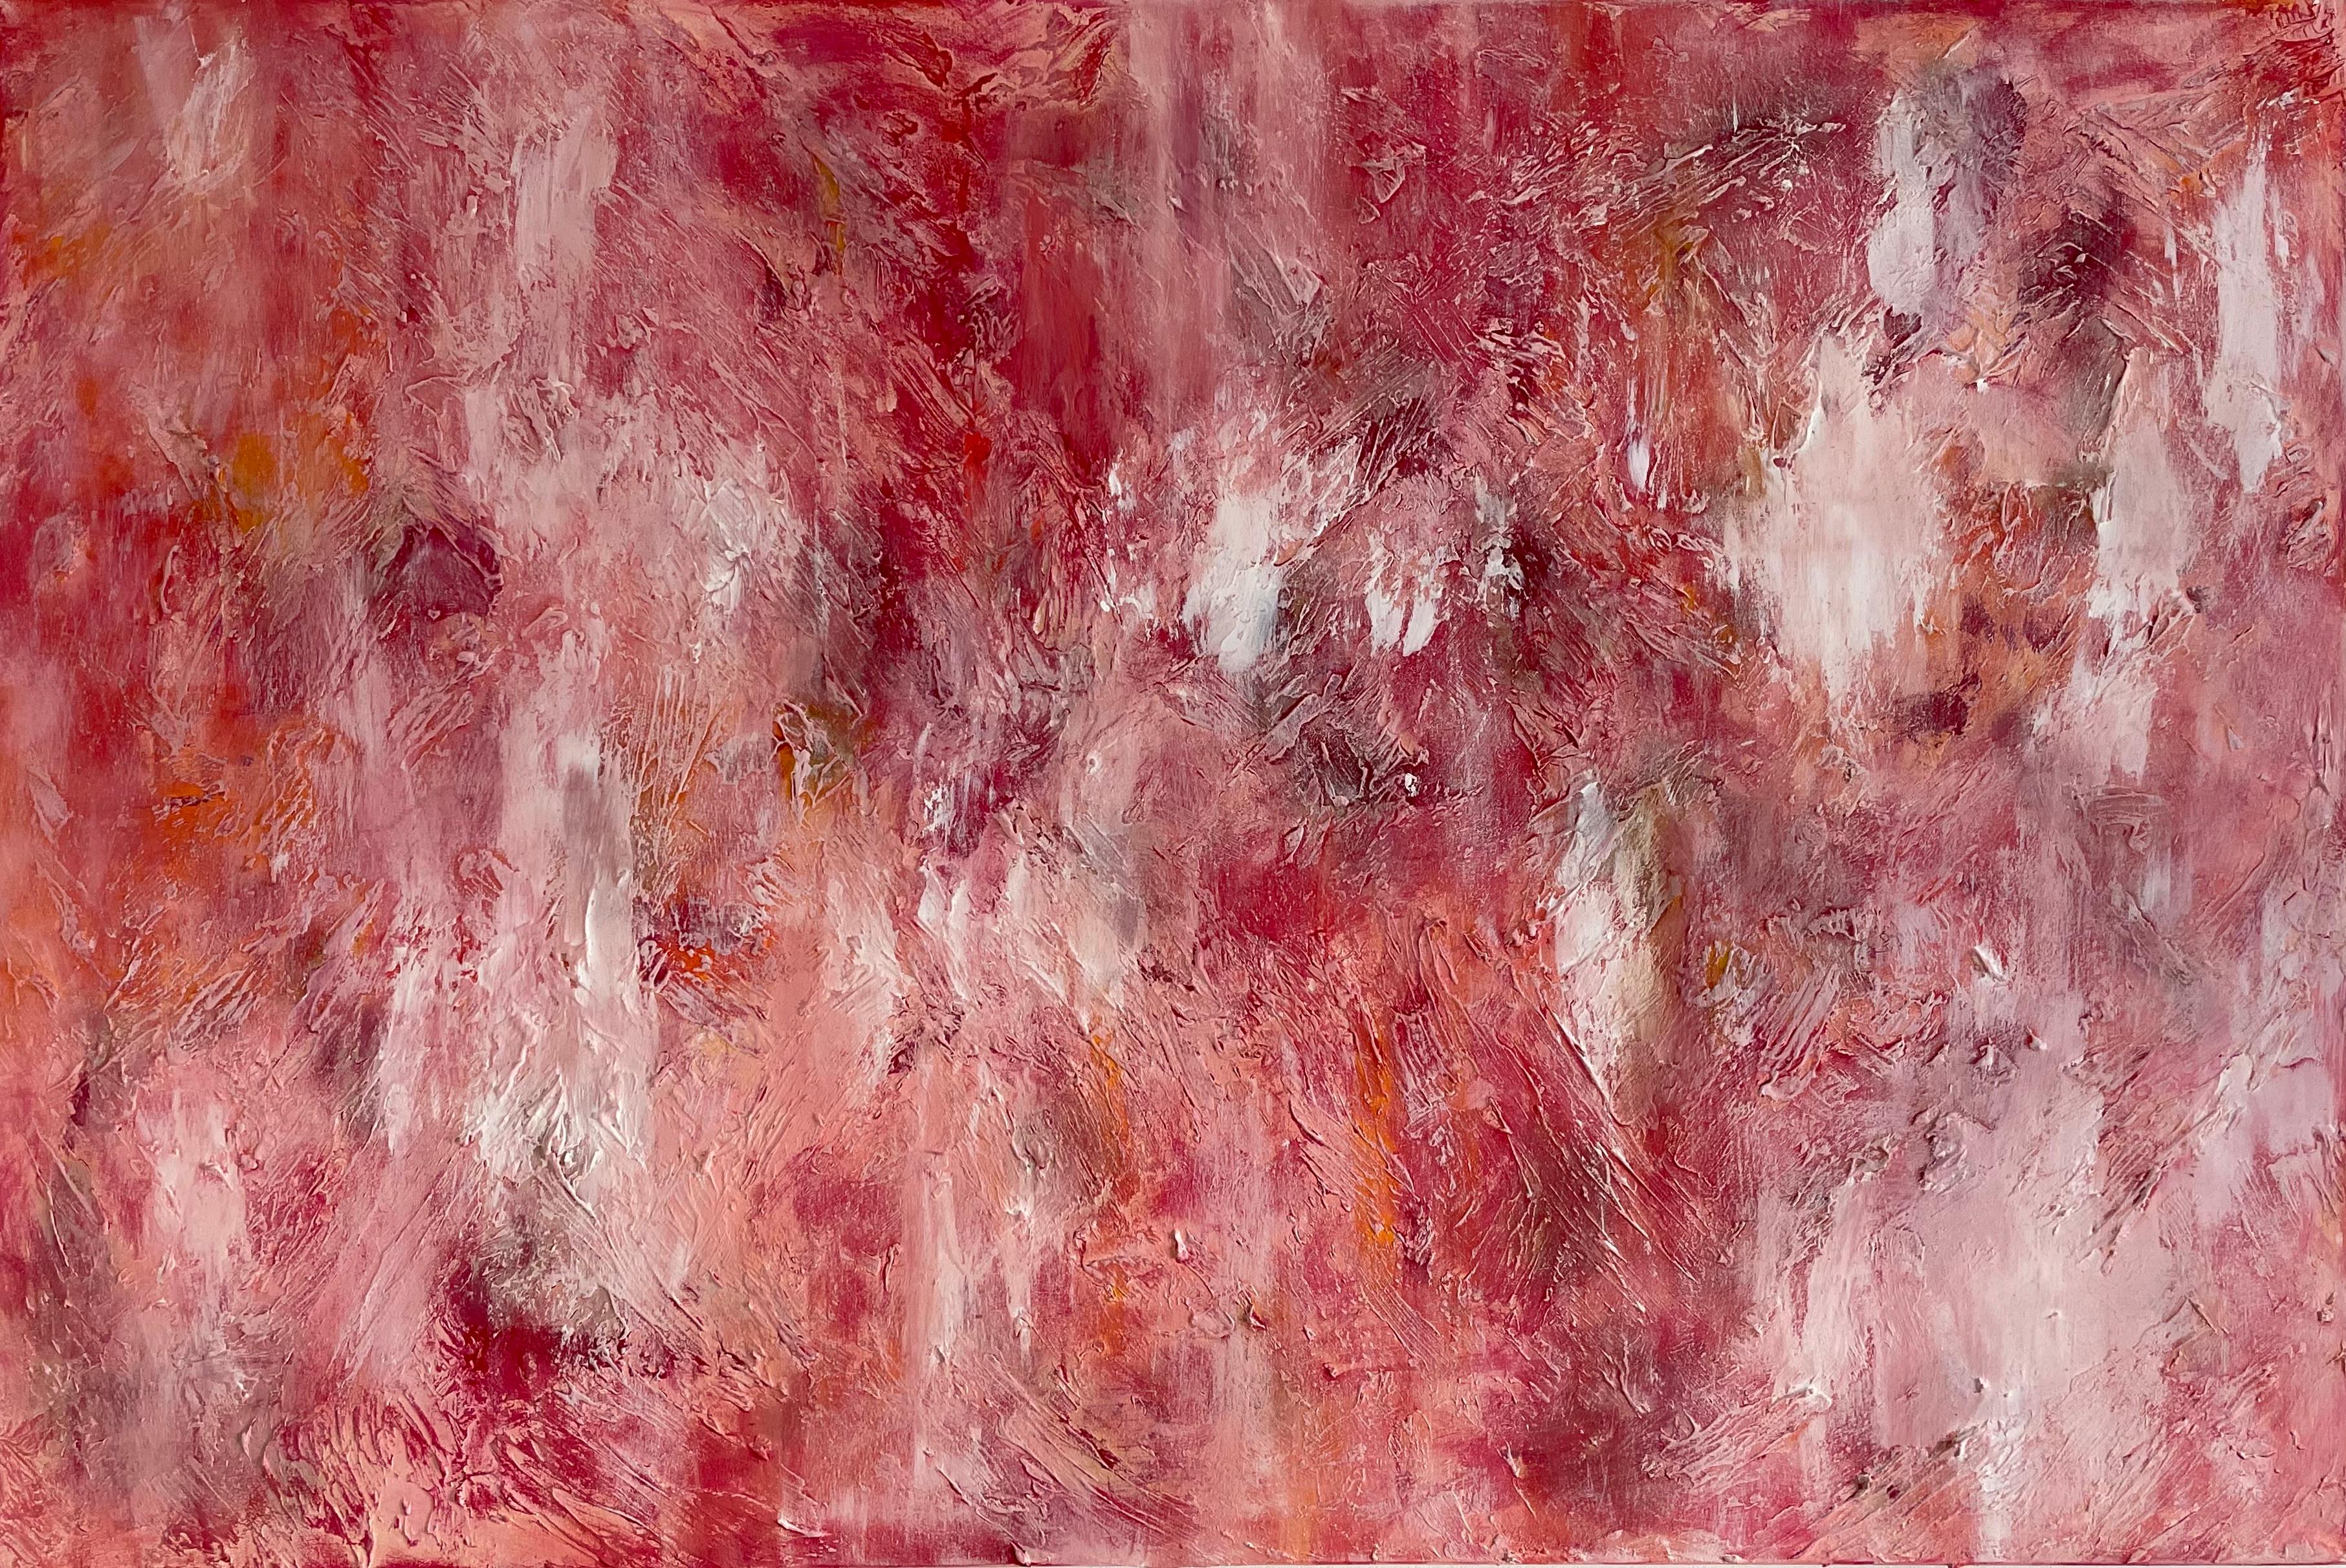 Introducing "In Love," a mesmerising abstract expressionistic painting by contemporary artist Sophie Pollock. This artwork features a palette of soft rose and pink nuances, subtly blending with hints of white and orange. The delicate and harmonious